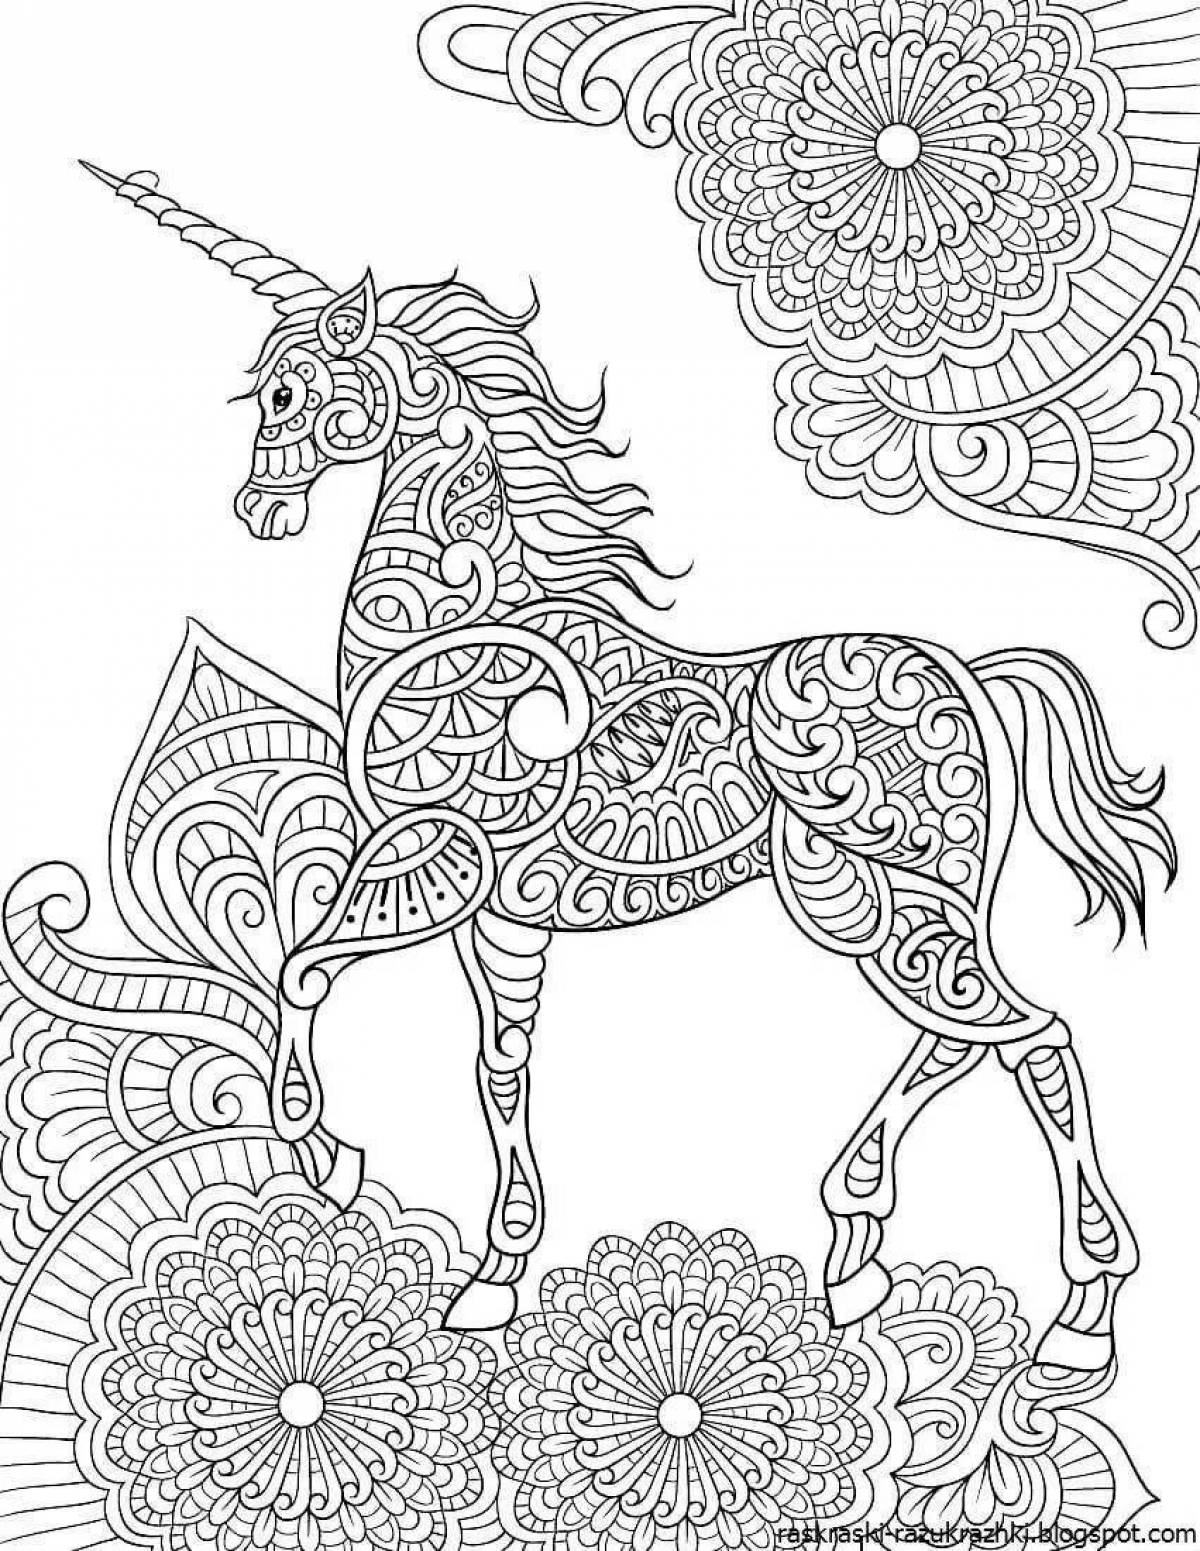 Happy coloring page small details for girls